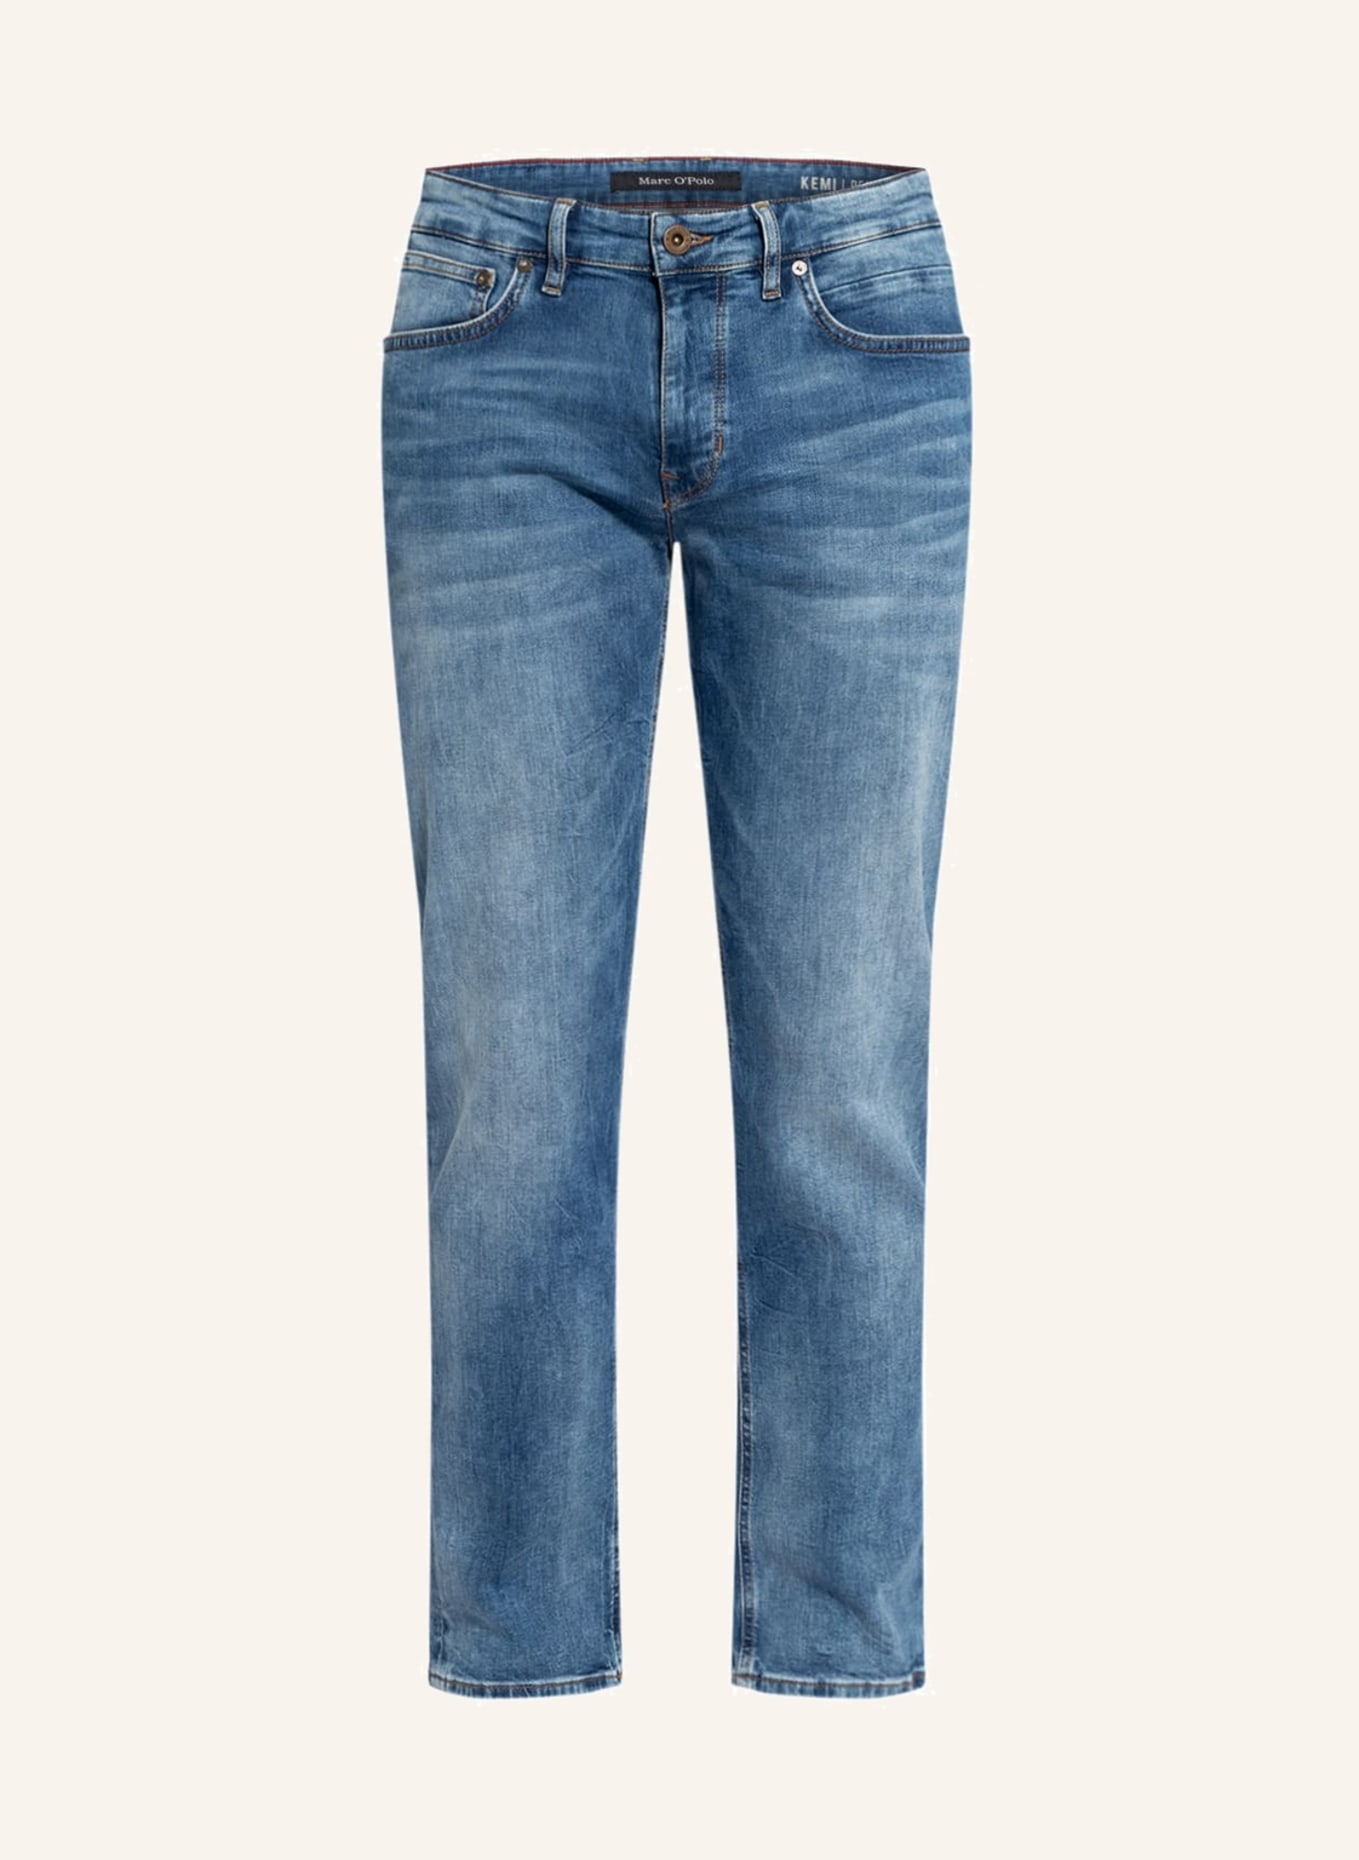 Marc O'Polo Jeans regular fit with cropped leg length, Color: 051 authentic mid (Image 1)